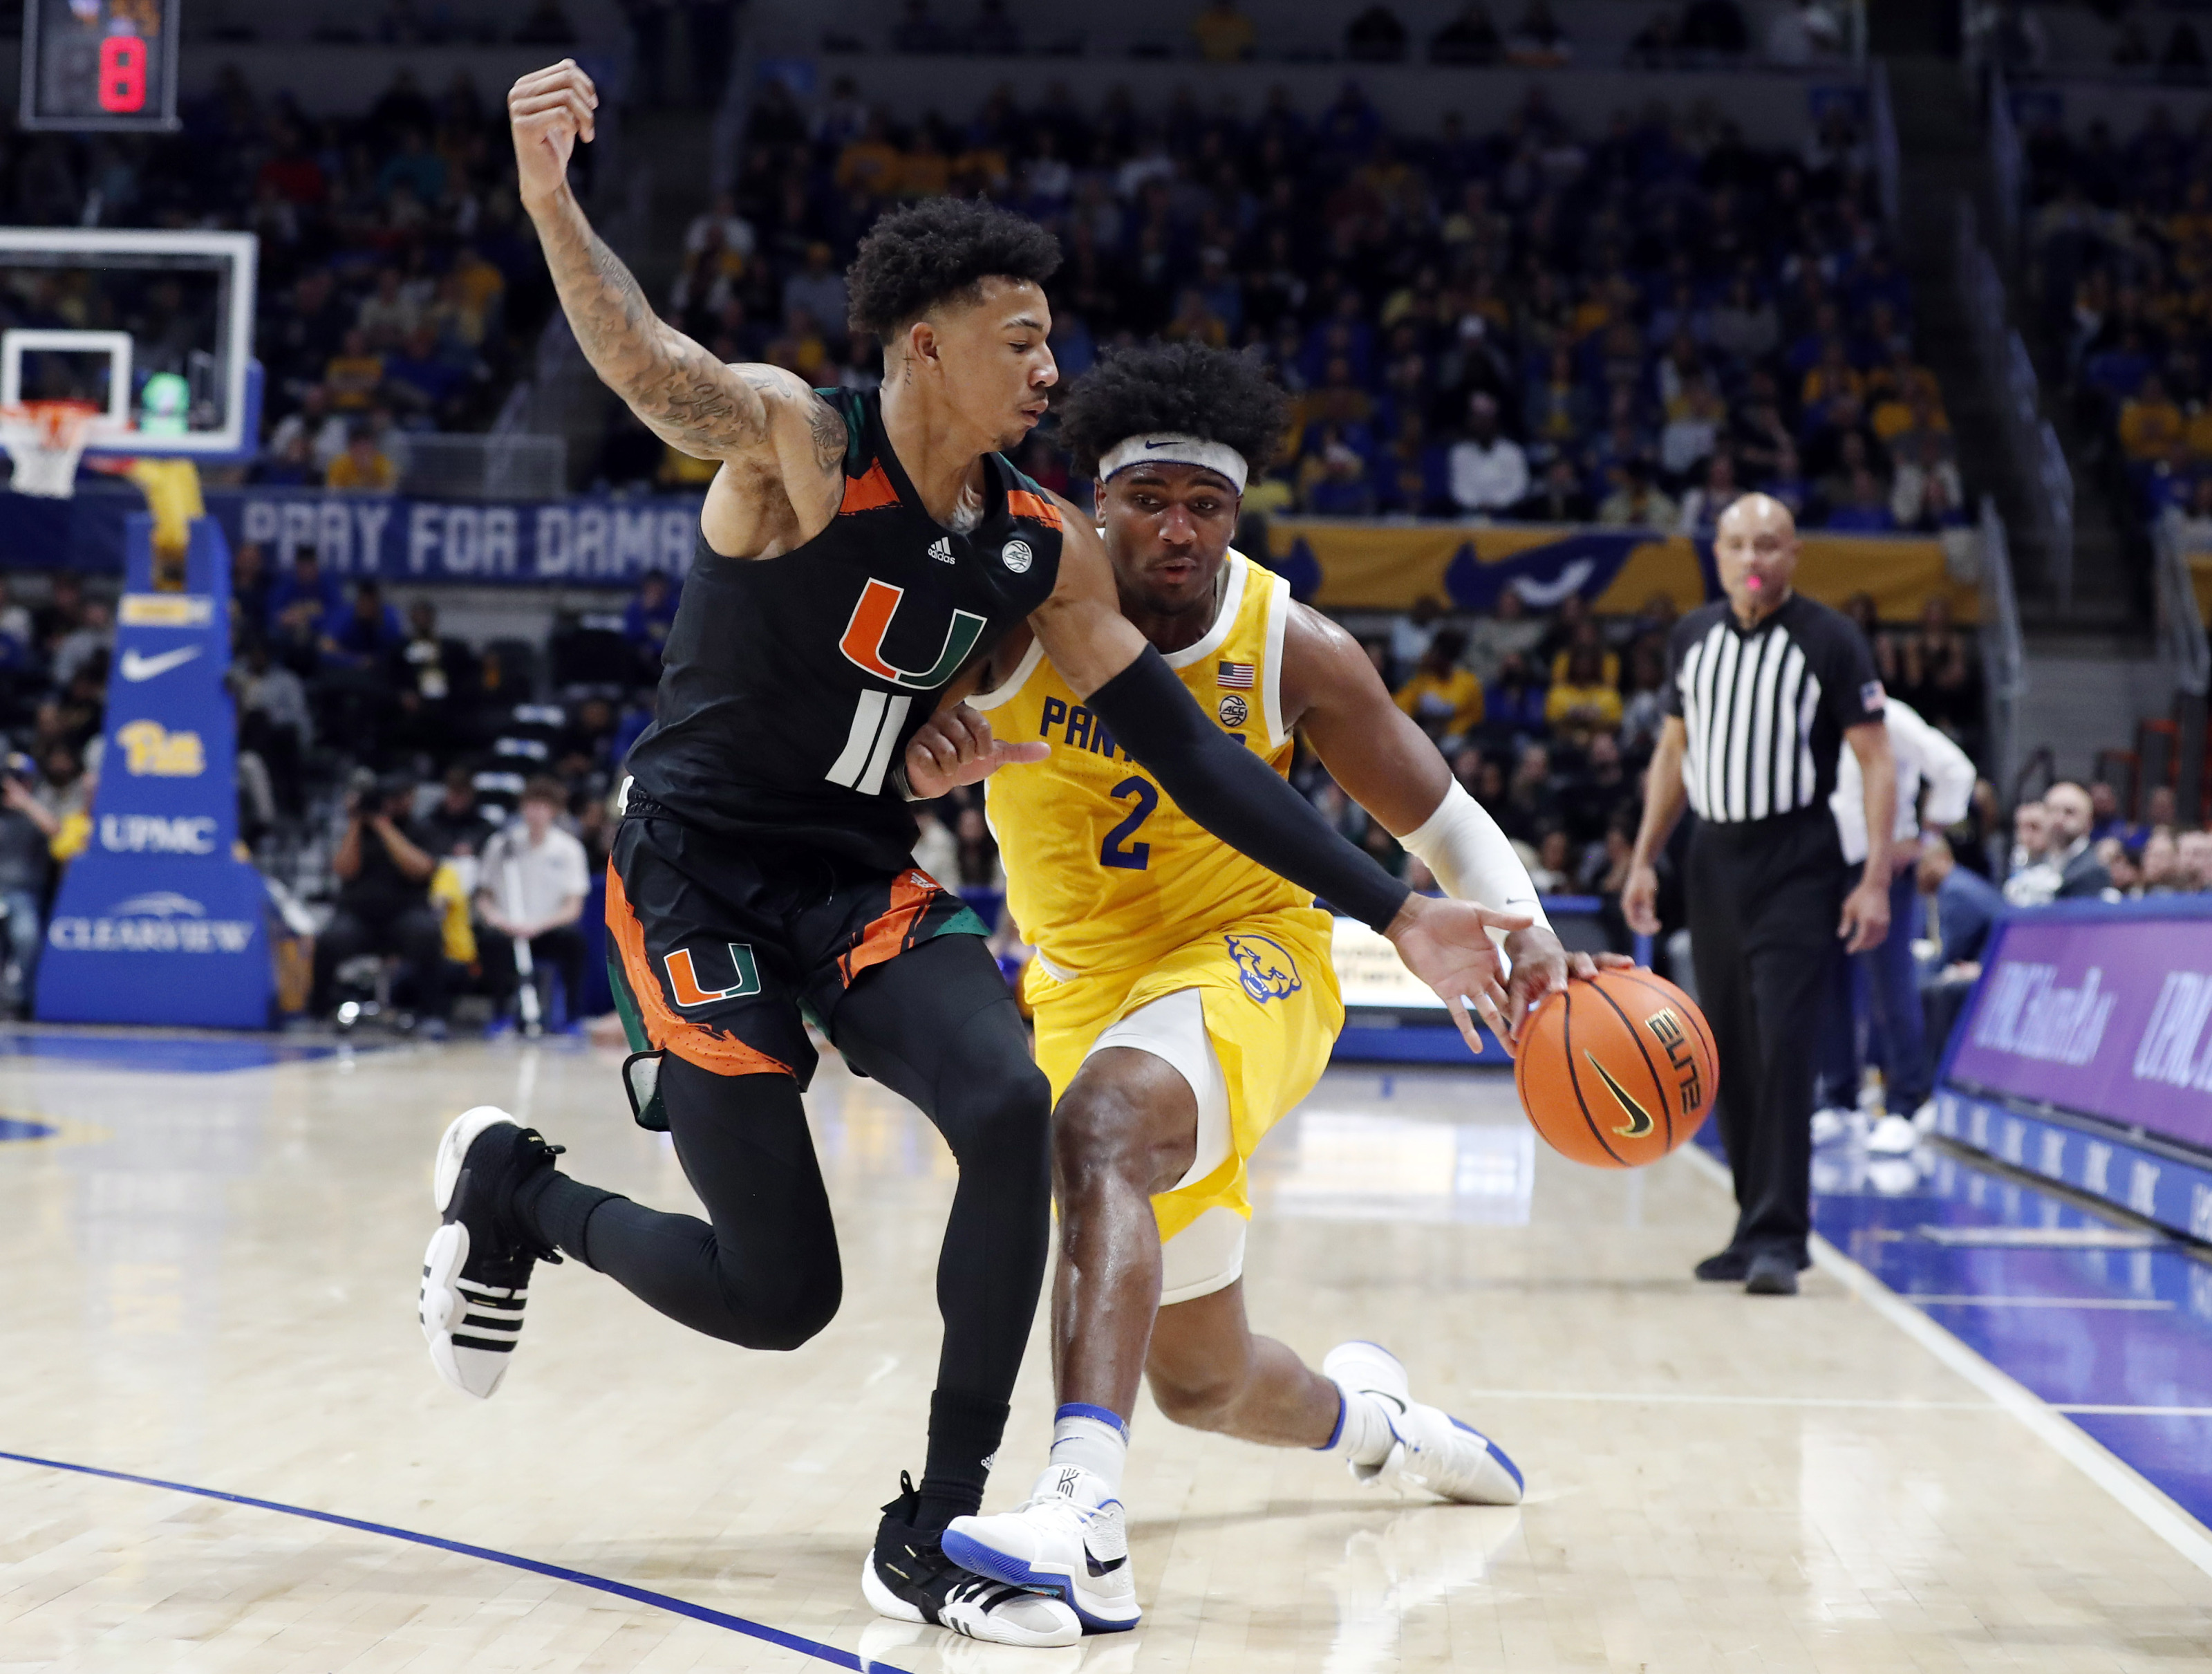 Pittsburgh at Miami basketball Game info, live stream, odds, TV